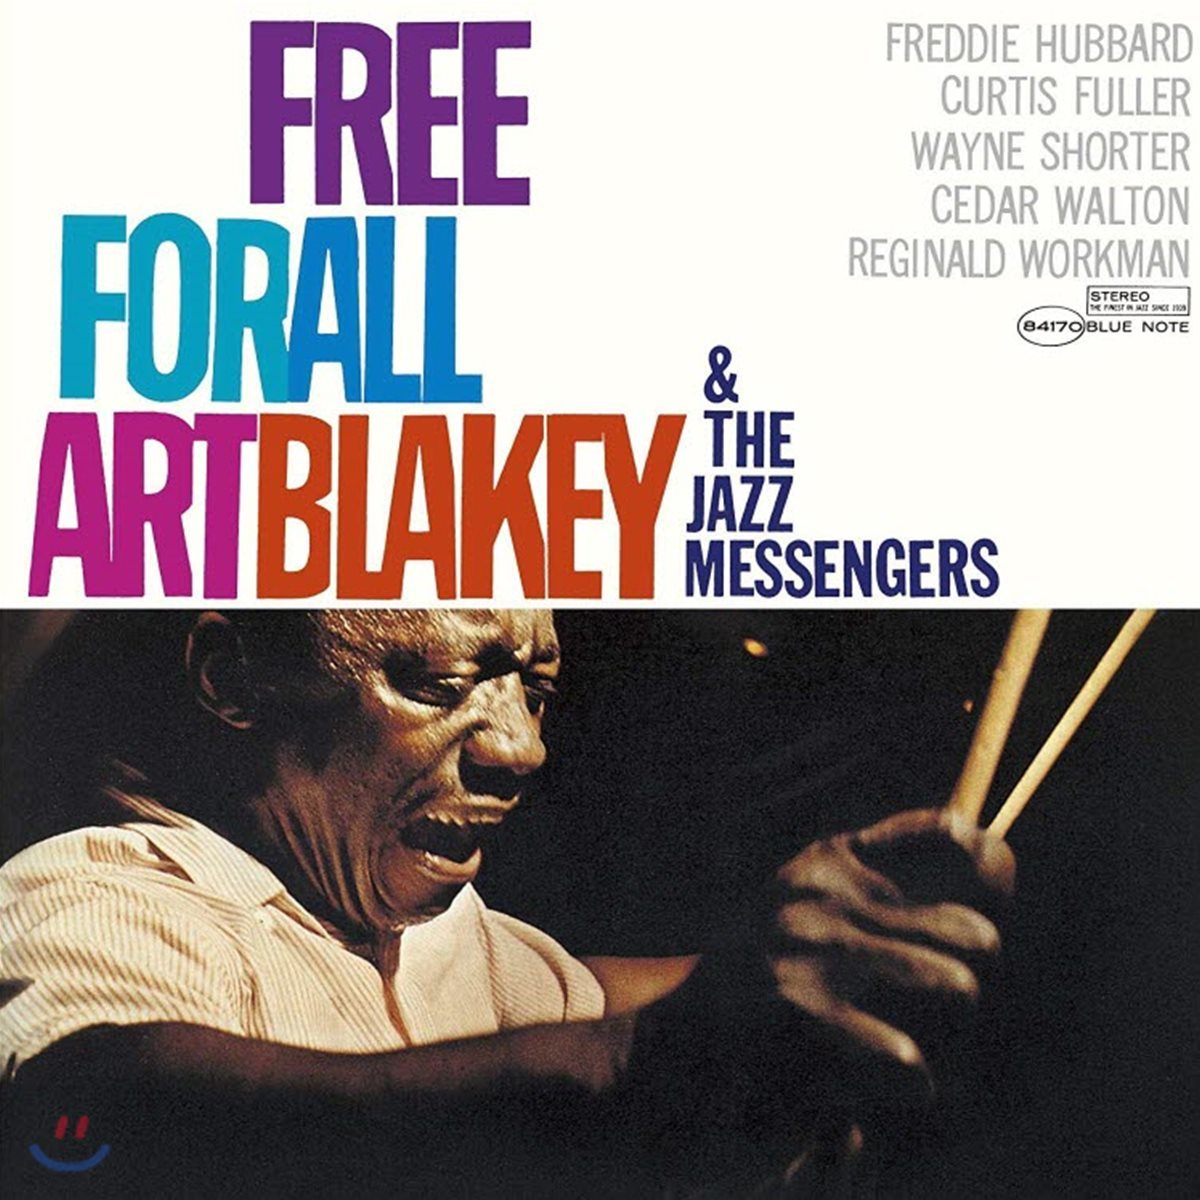 Art Blakey And The Jazz Messengers (아트 블레이키 앤 재즈 메신저) - Free for all